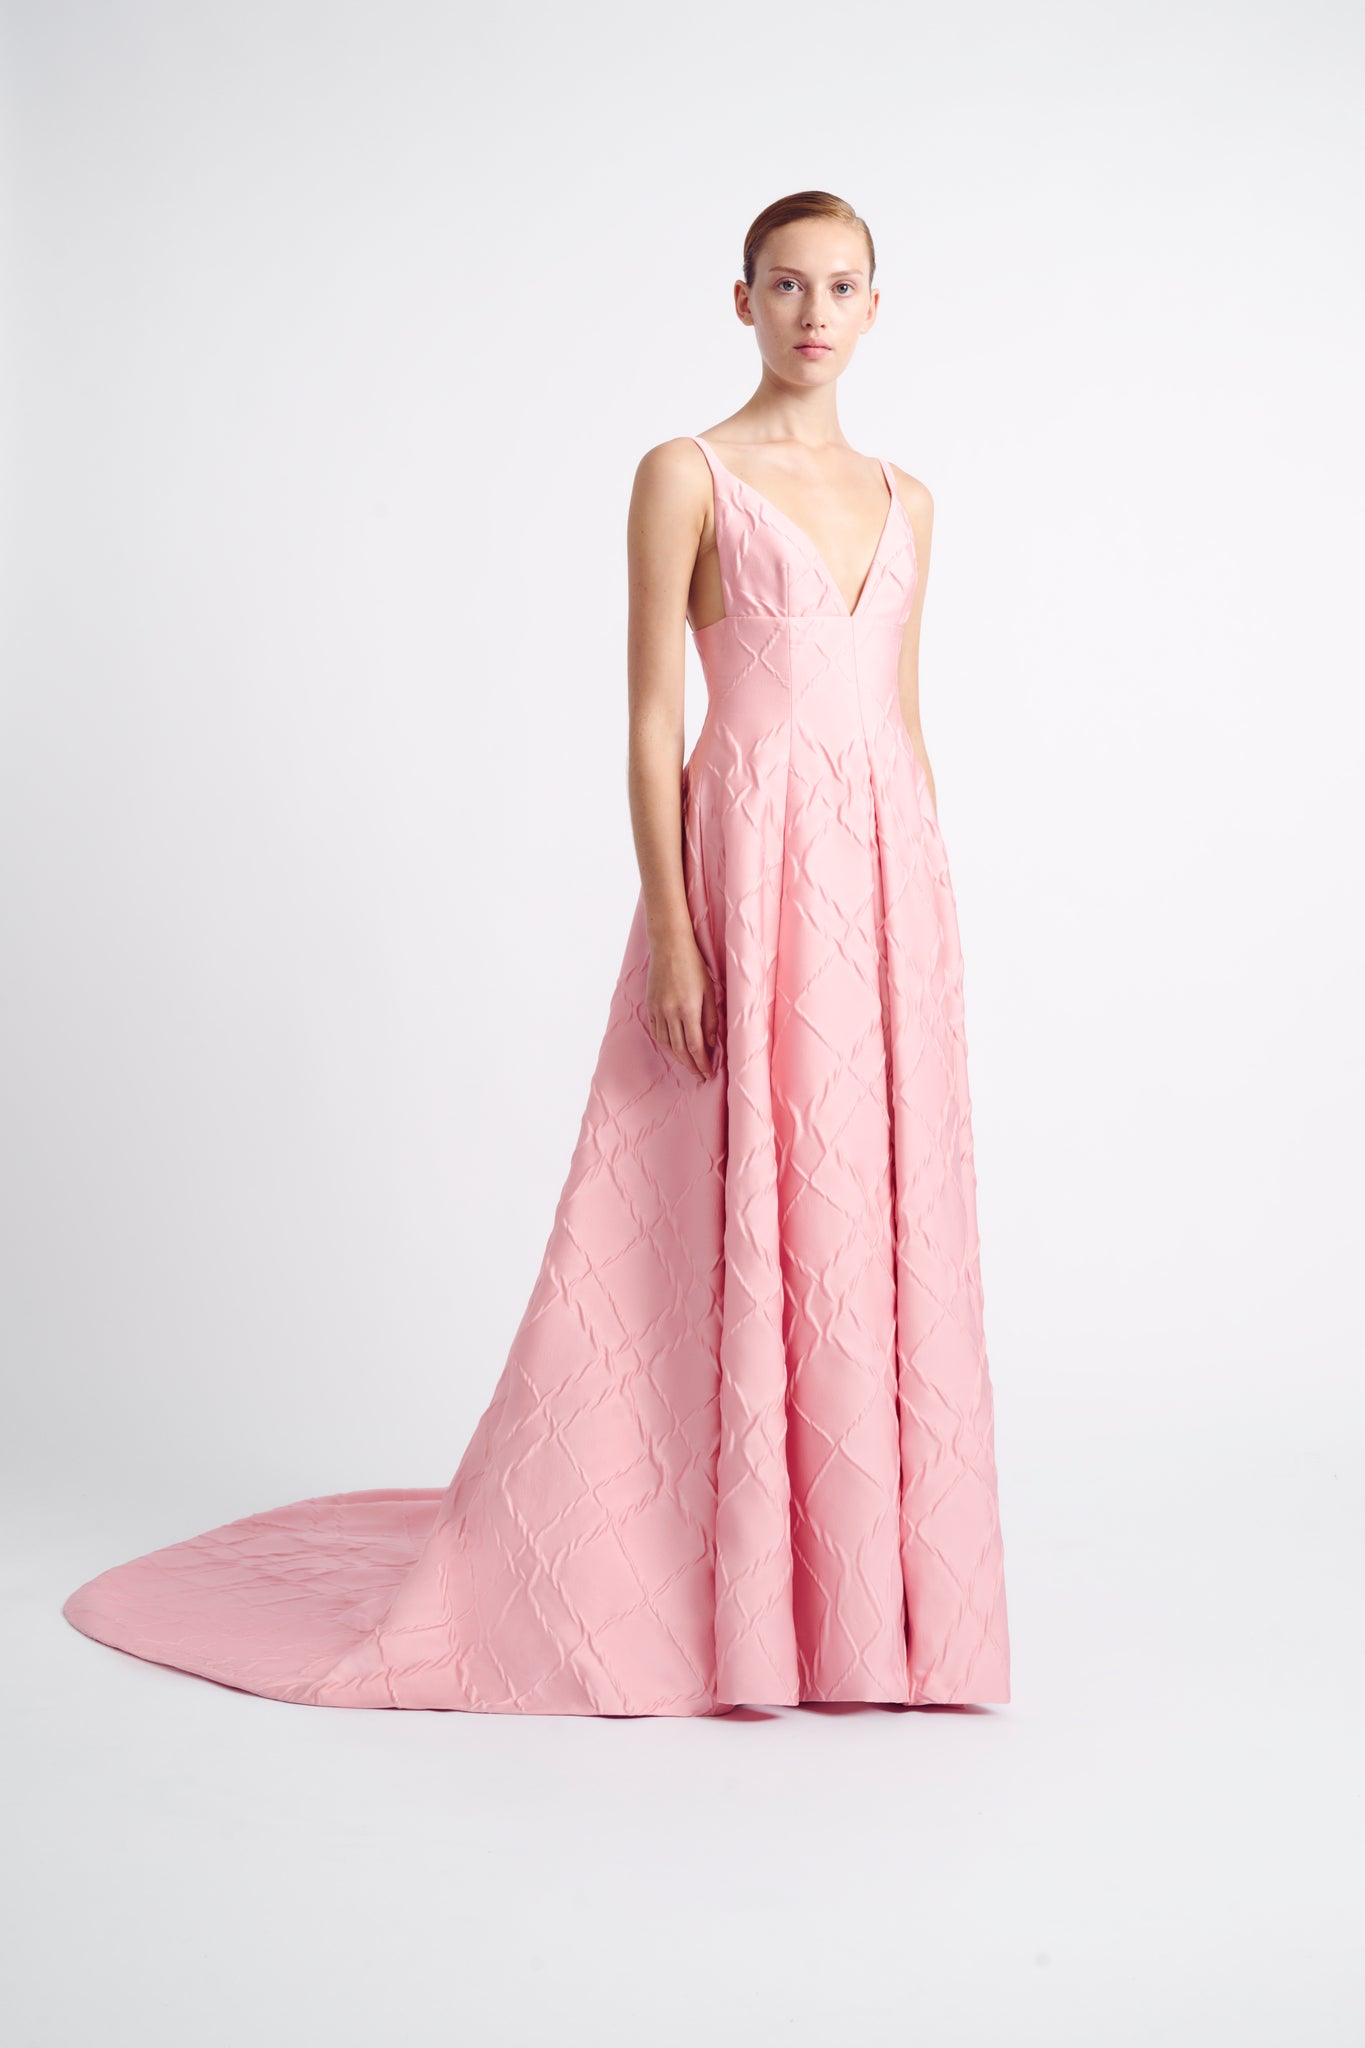 Merise Dress | Pink Floor Length Evening Gown with Train | Emilia Wickstead